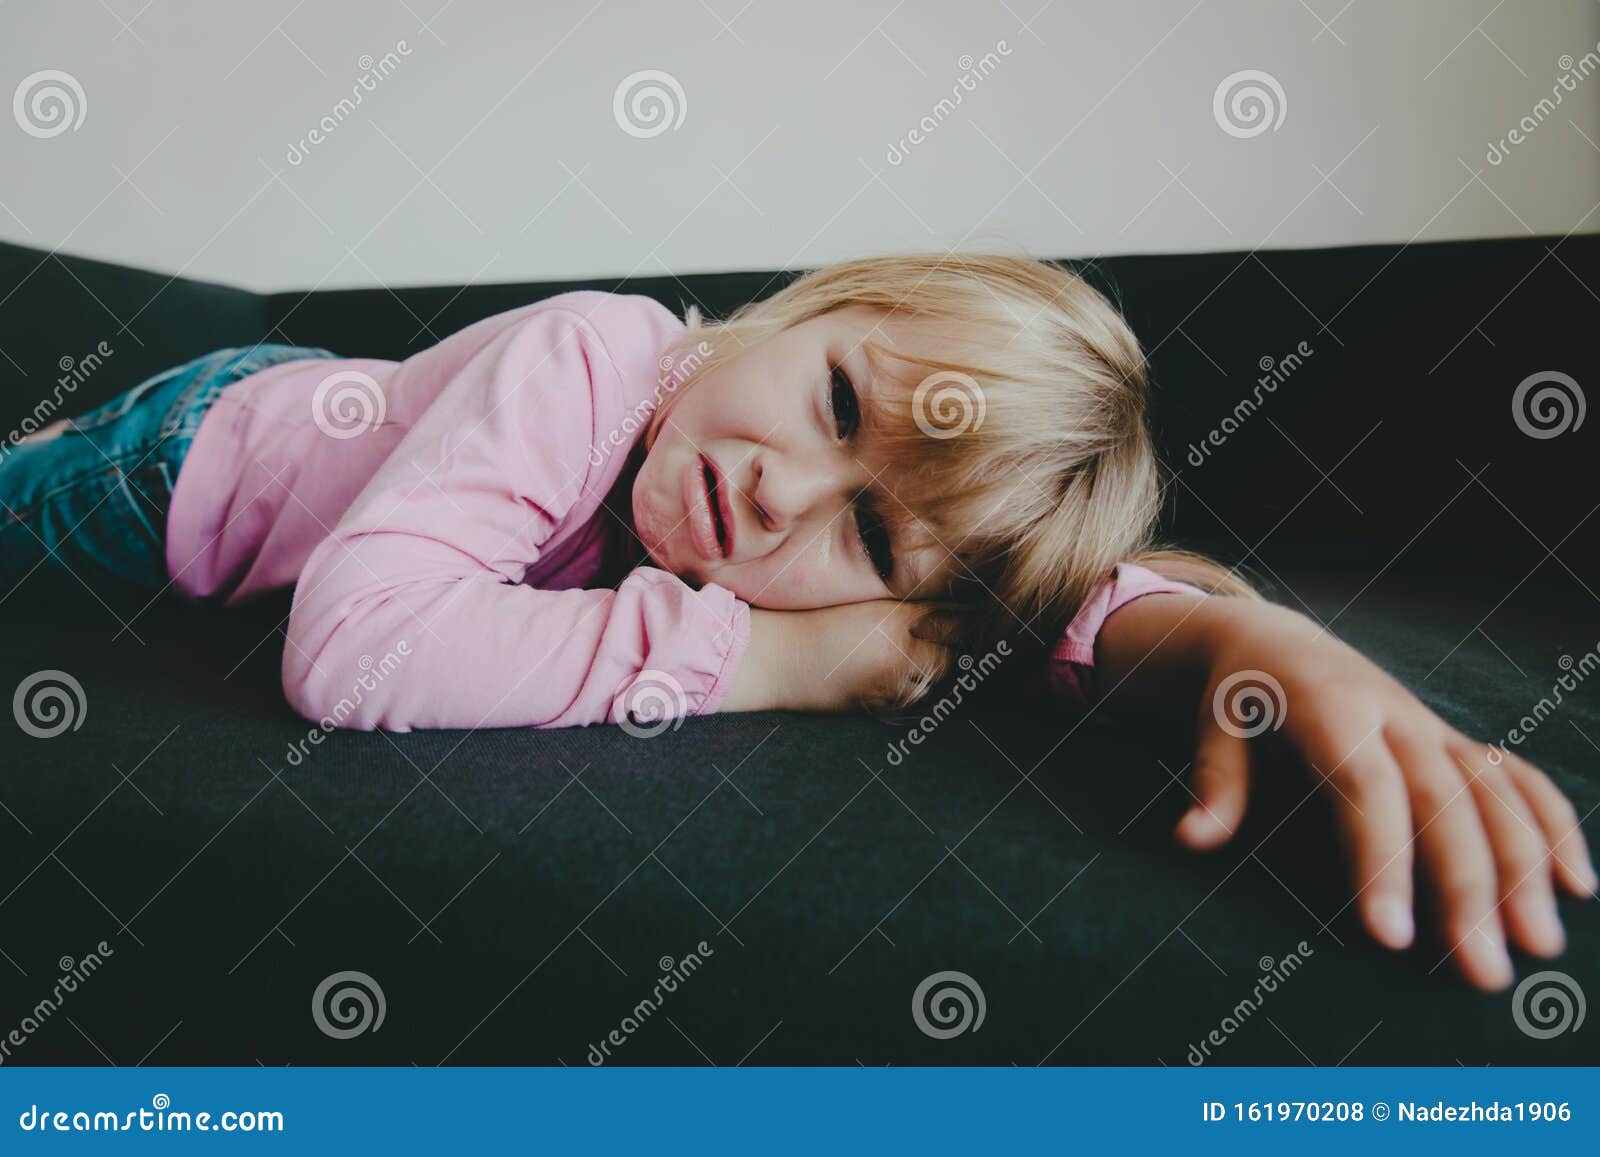 Sad Crying Child, Little Girl Stress, Kids Exhaustion Stock Photo ...